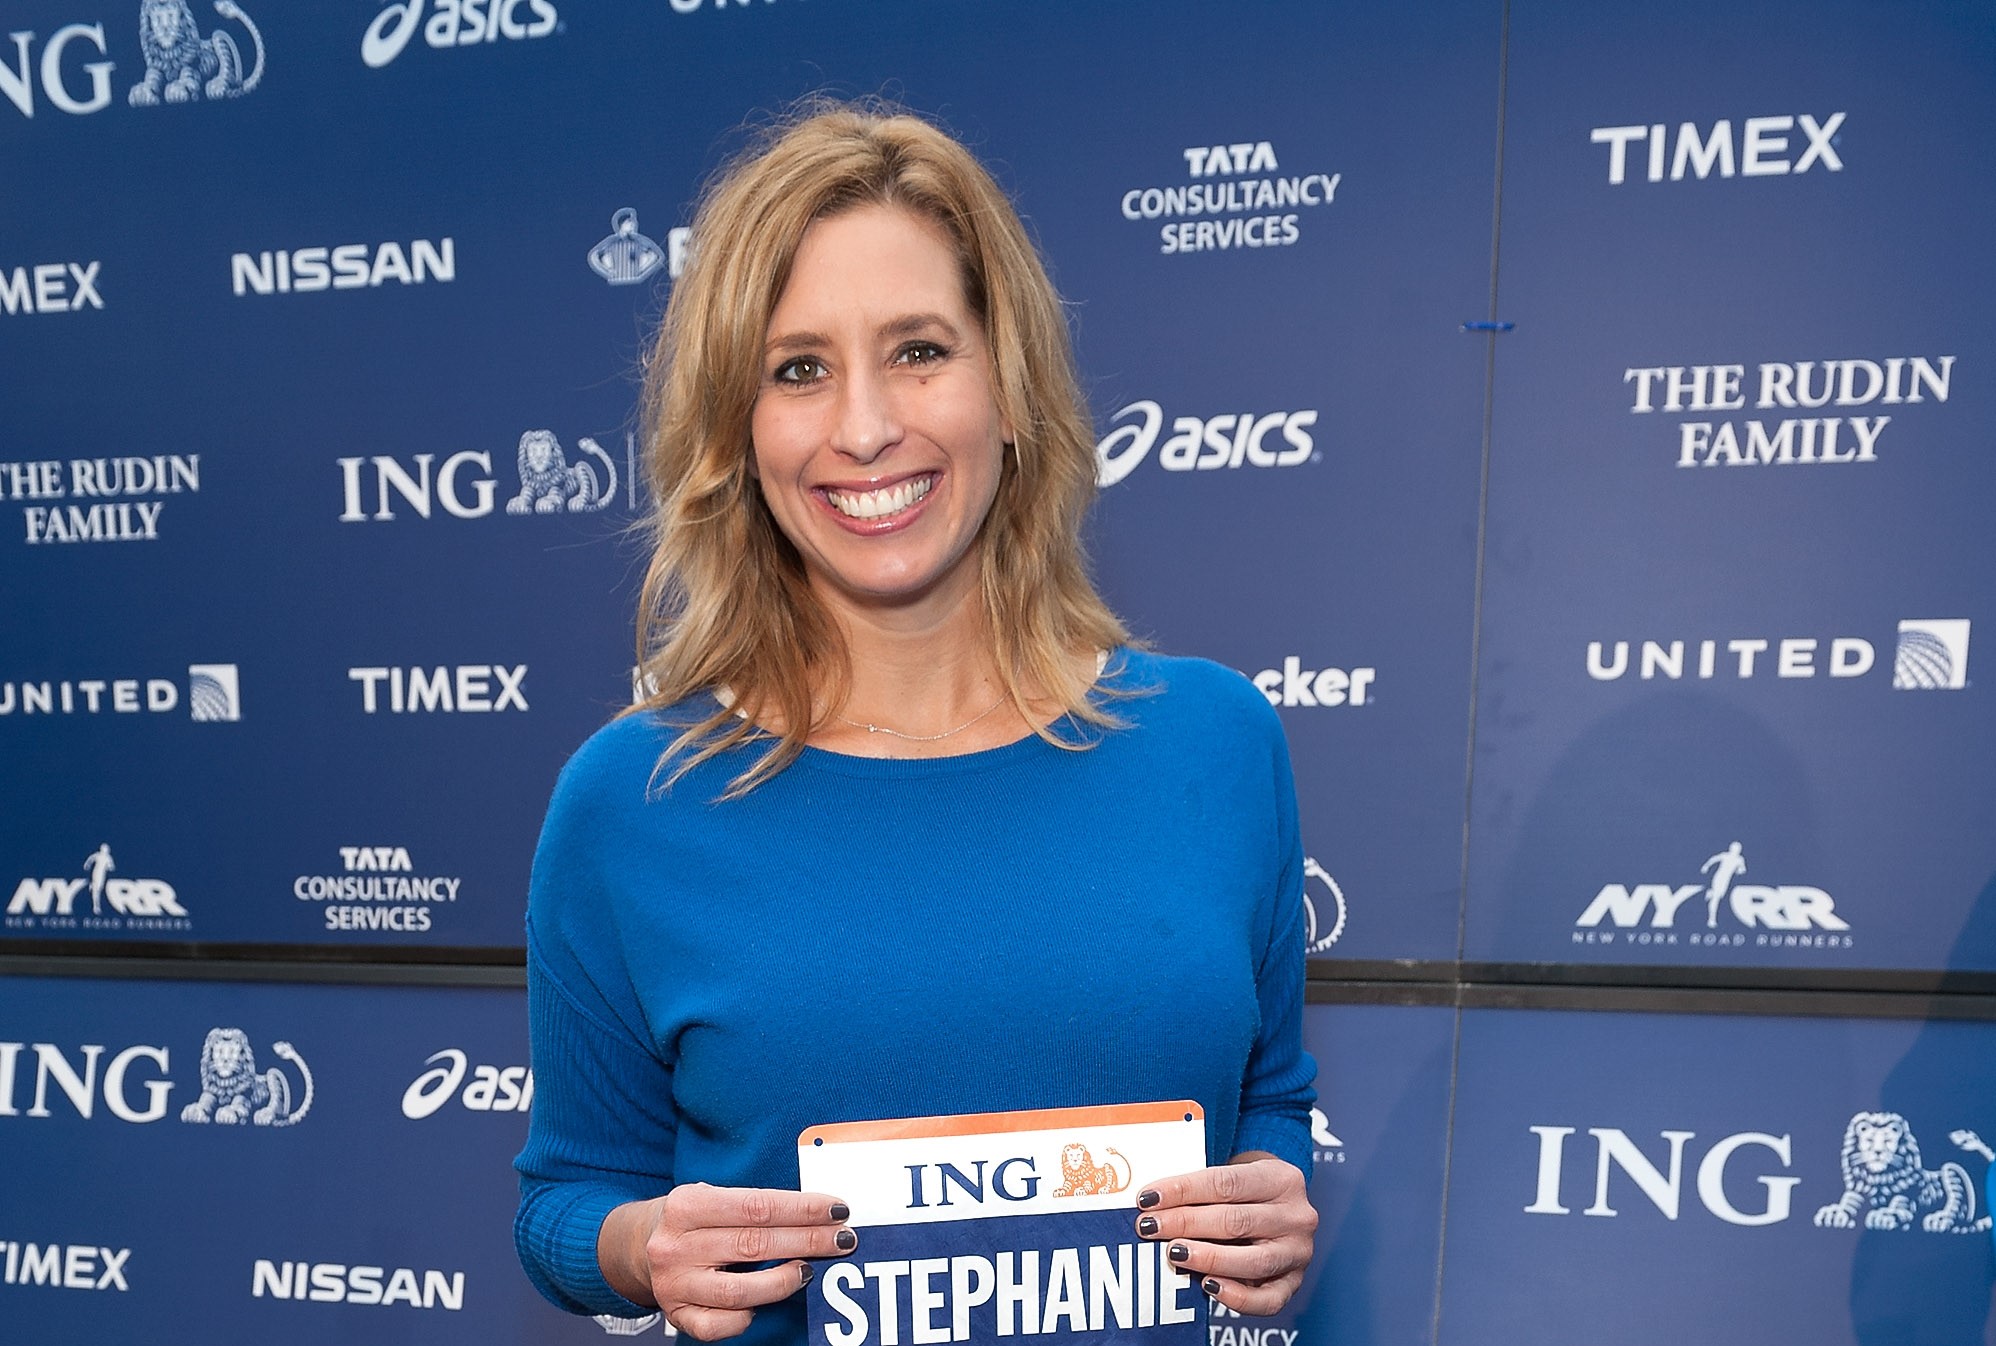 Meteorologist Stephanie Abrams at the 2013 ING NYC Marathon press conference.